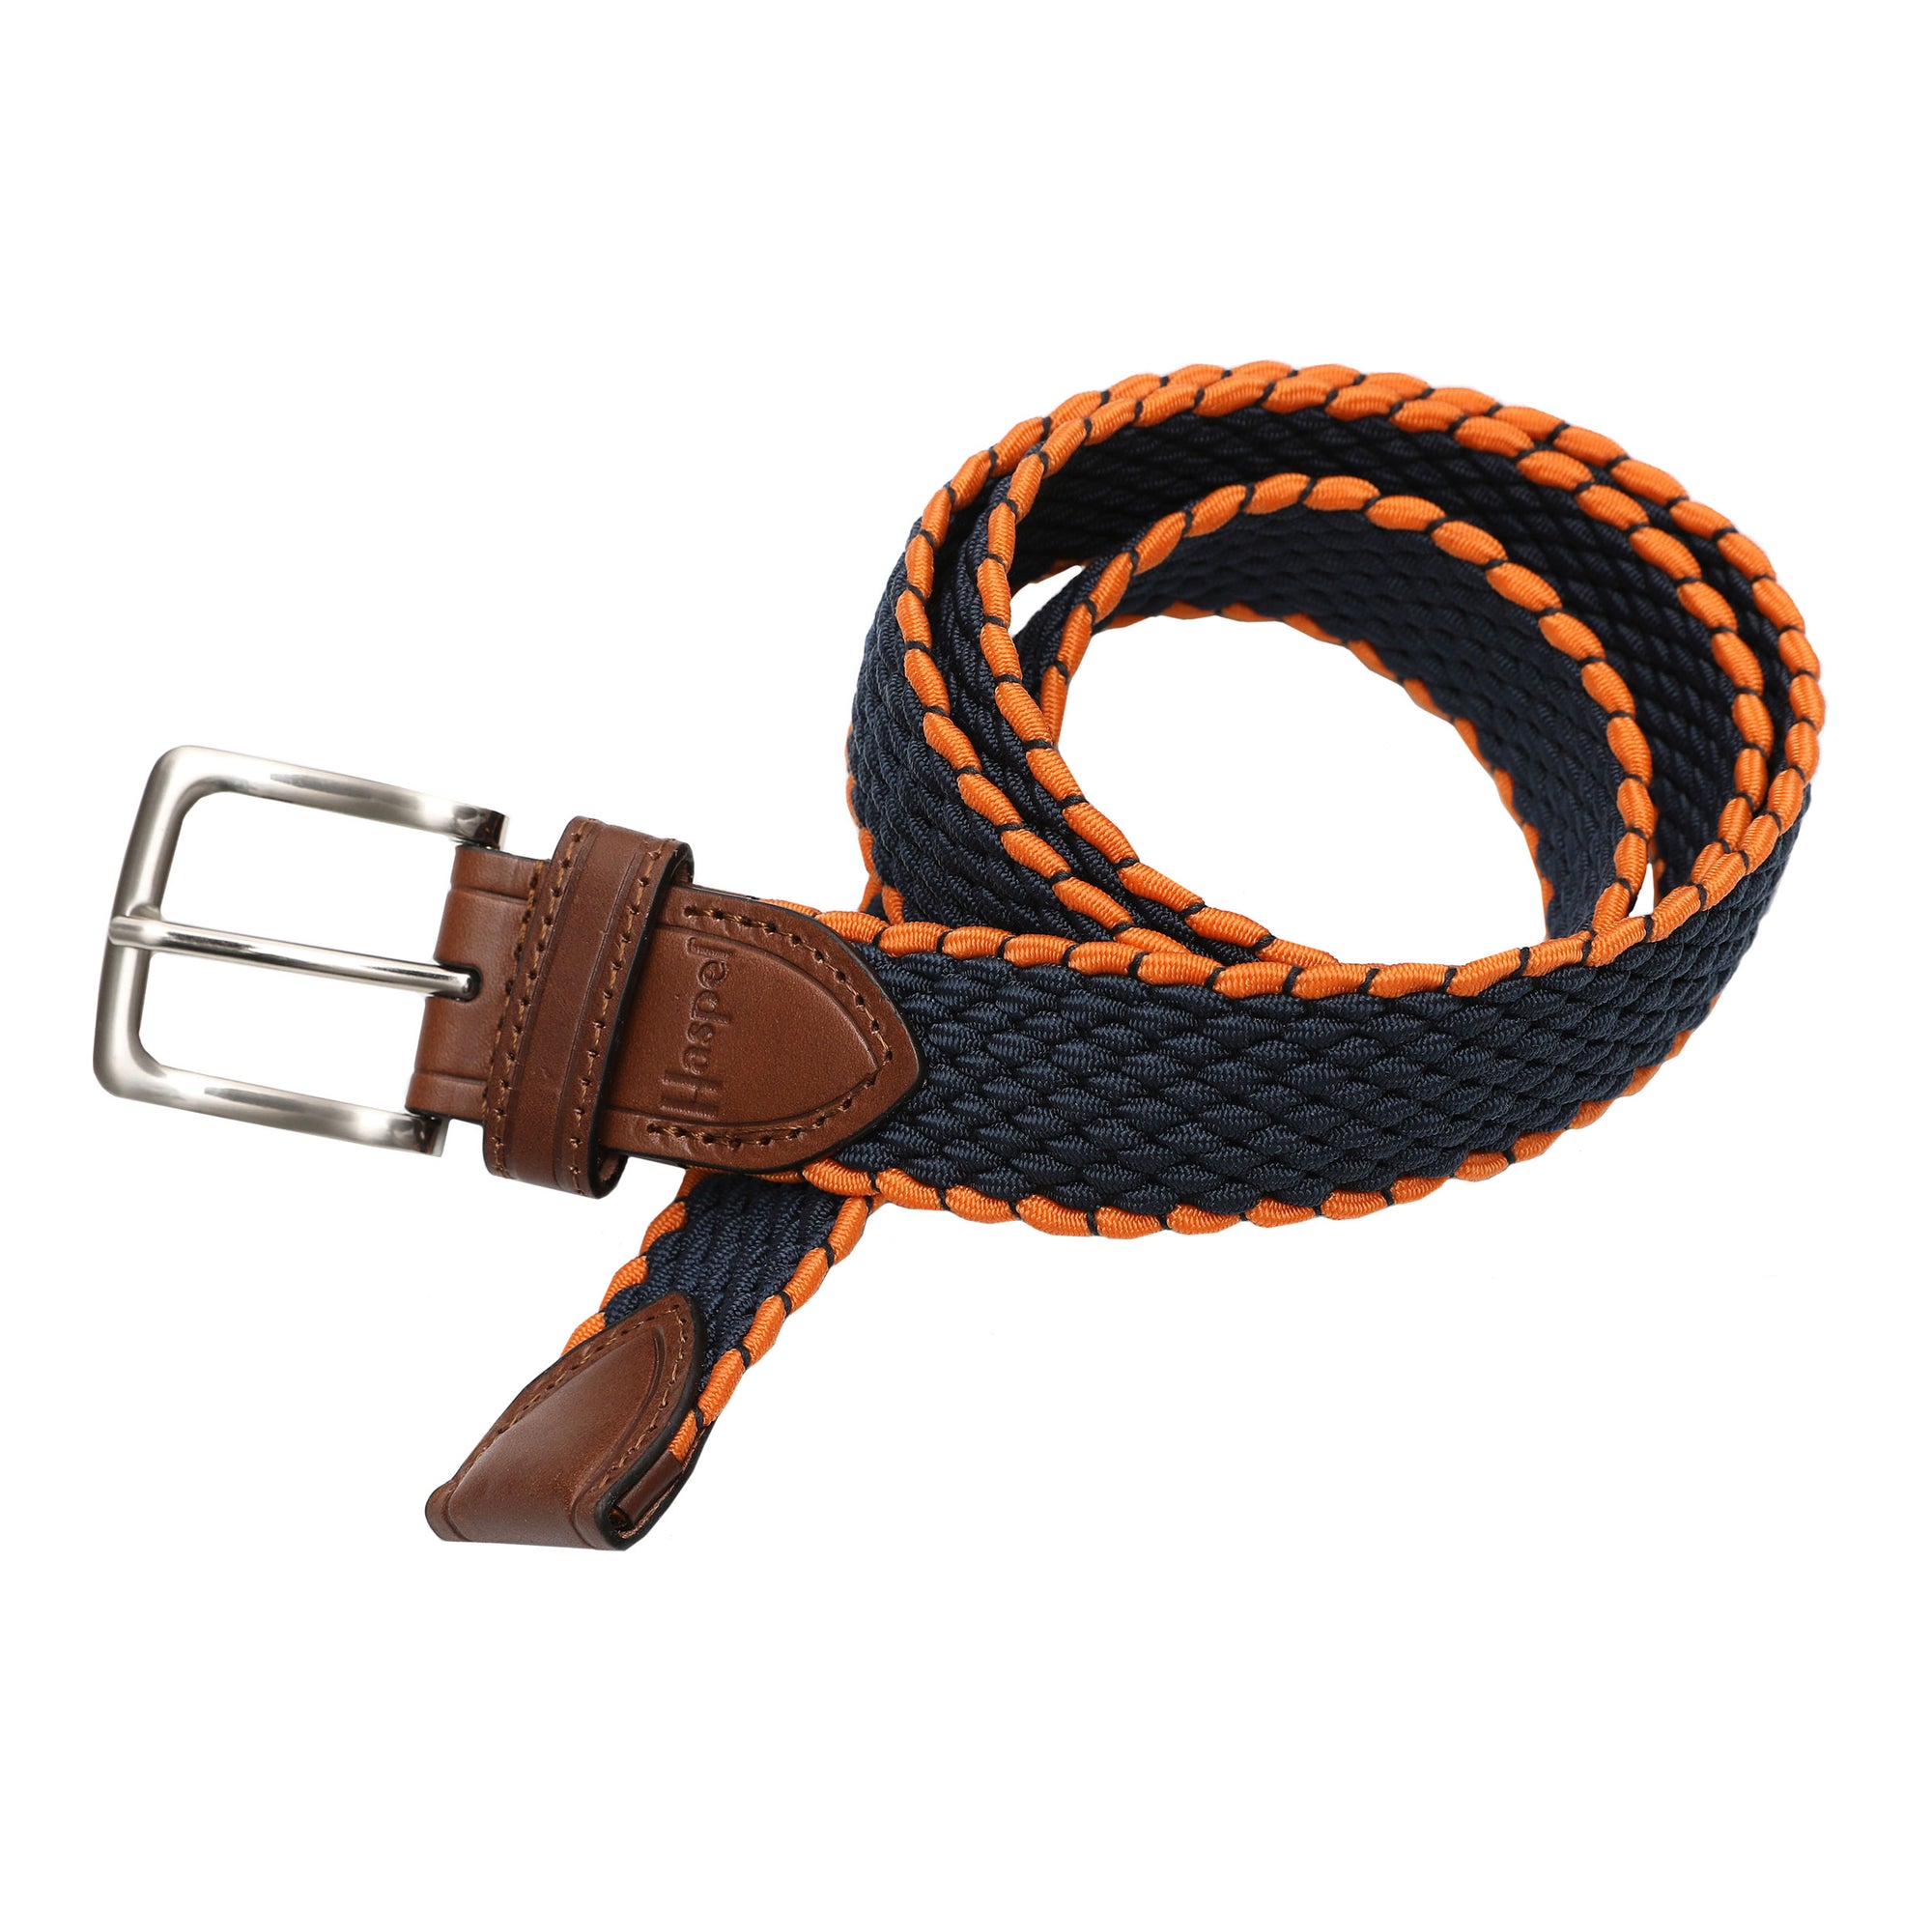 Crafted to add a rich style to any look, our elastic belts feature a leather tab, antique nickel finish buckle, and color choices to support our favorite collegiate teams.   Braided elastic • Briar Waxy Leather Points • 1-3/8" wide • Antique Nickel Finish Buckle • Imported • Always order belts one size above your natural waist size. • Return Policy